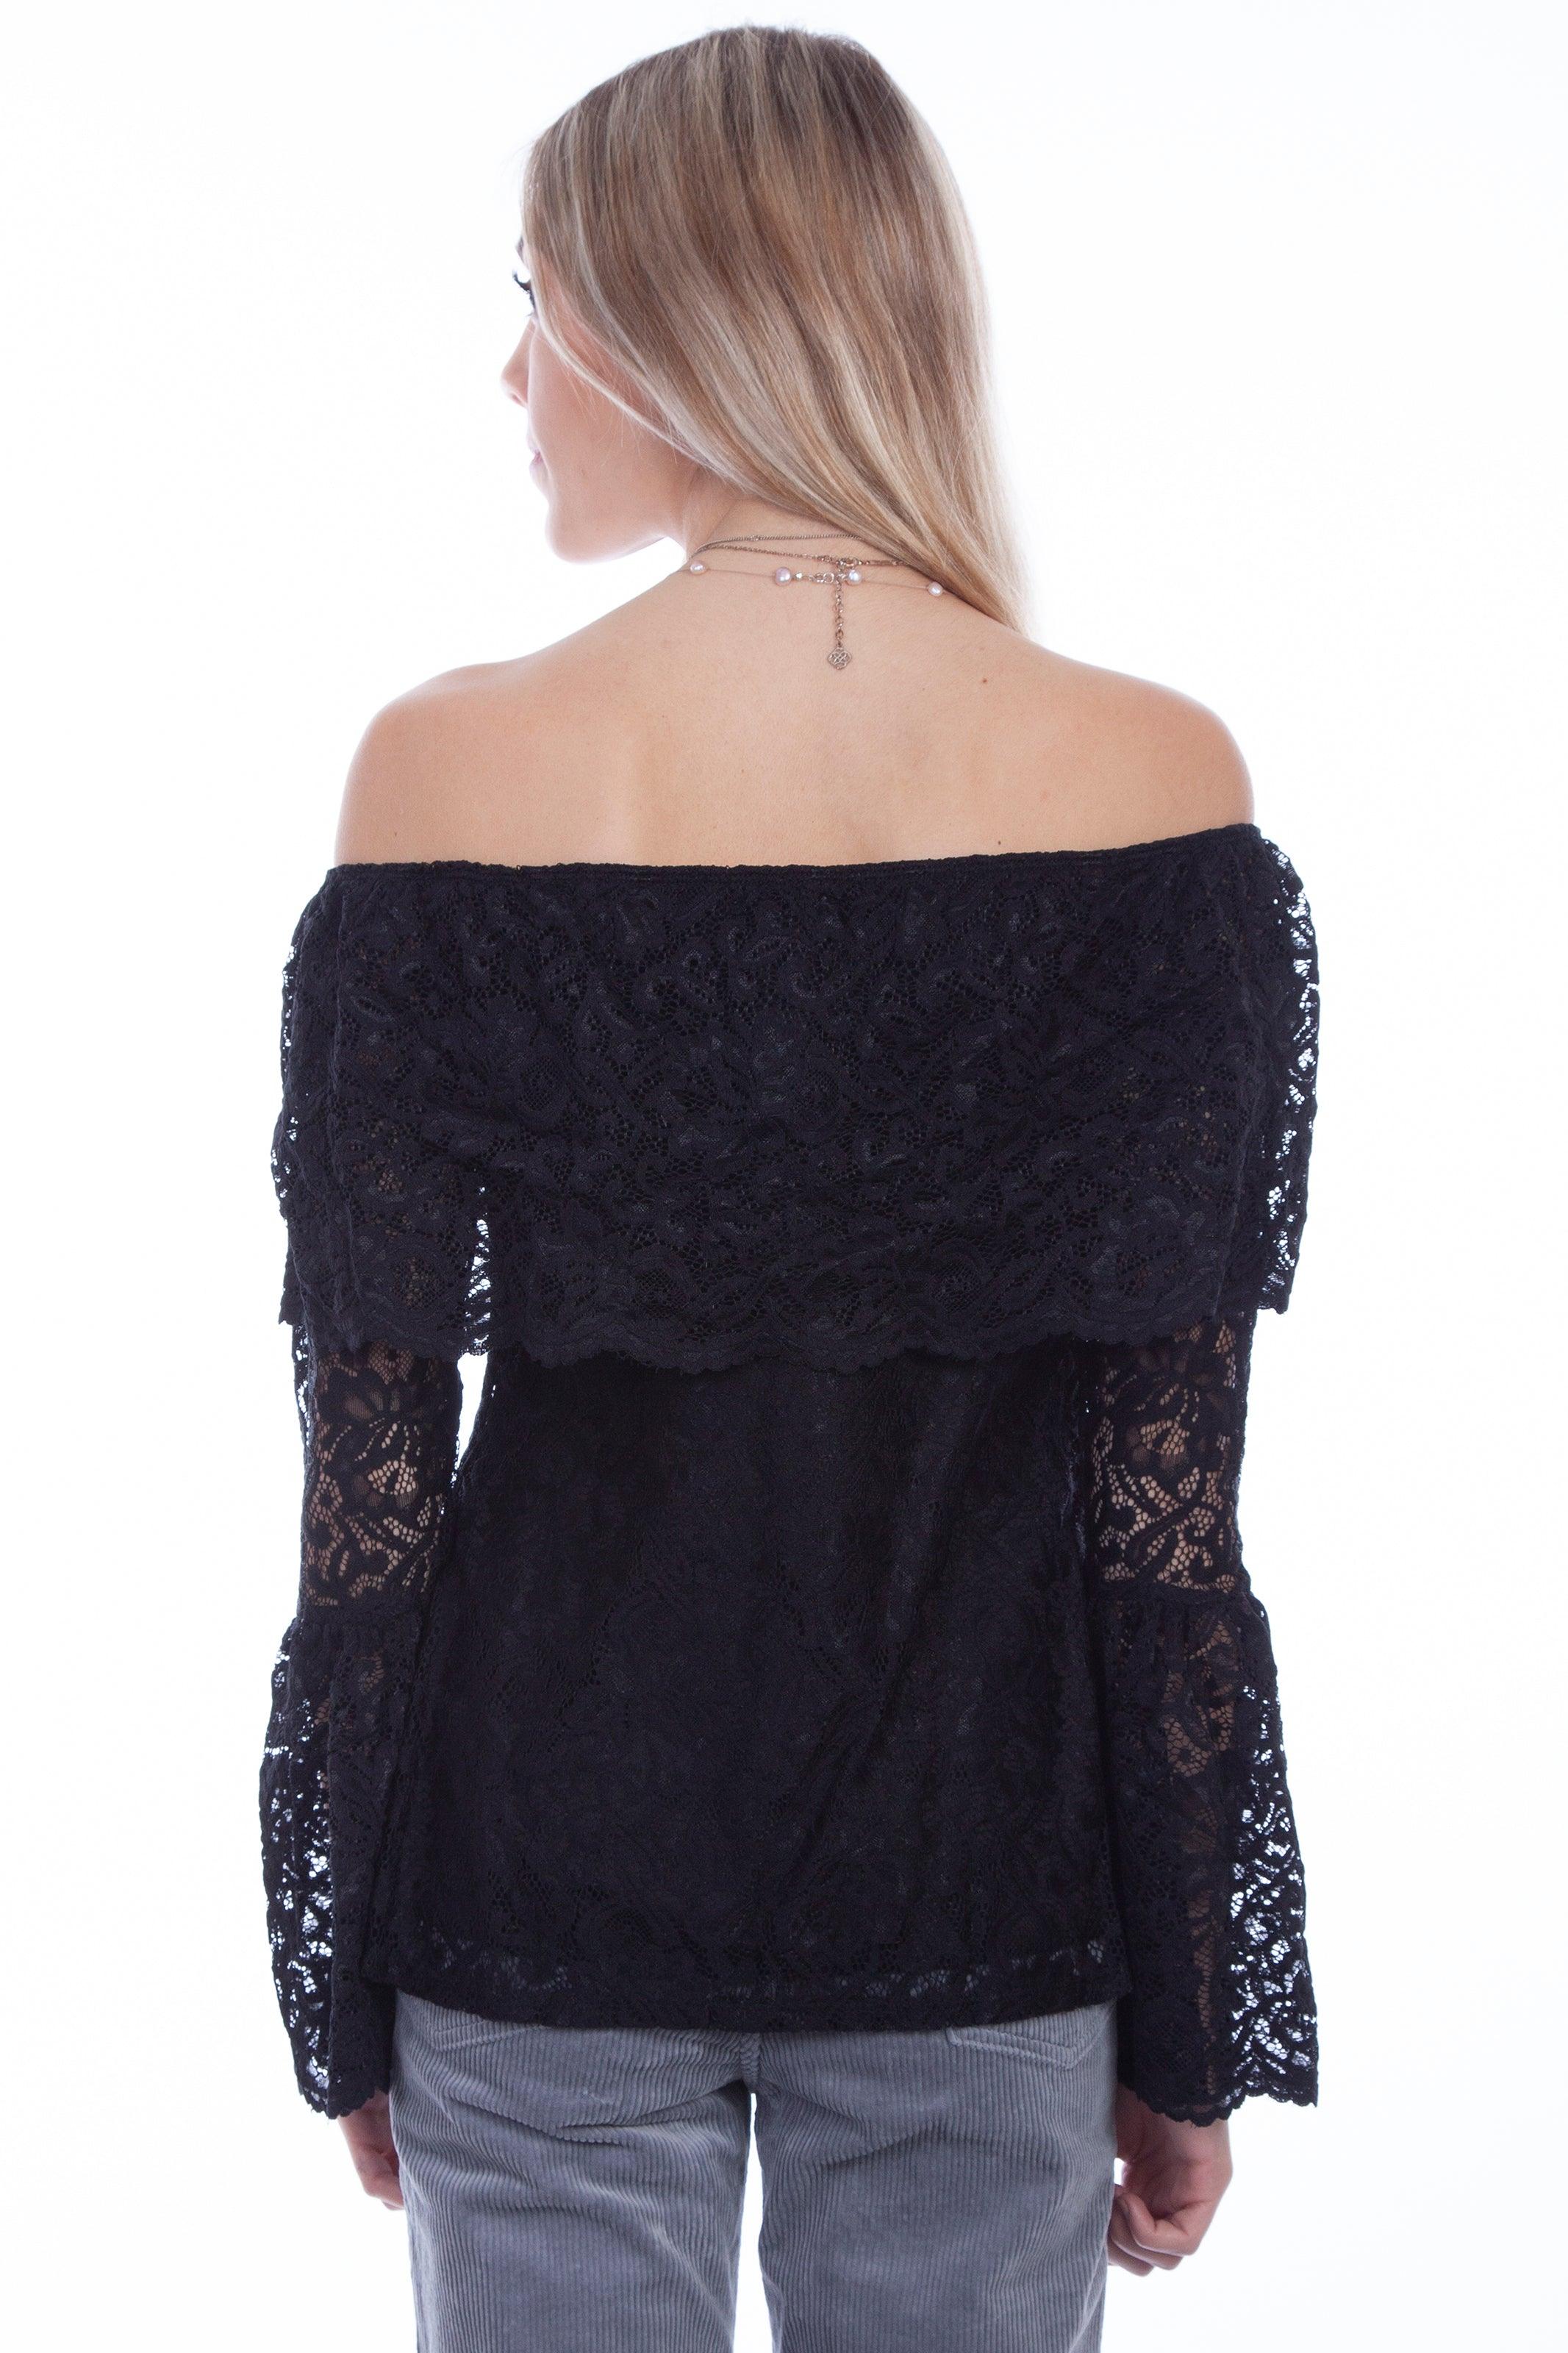 Scully BLACK ON/OFF SHOULDER RUFFLED LACE BLOUSE - Flyclothing LLC